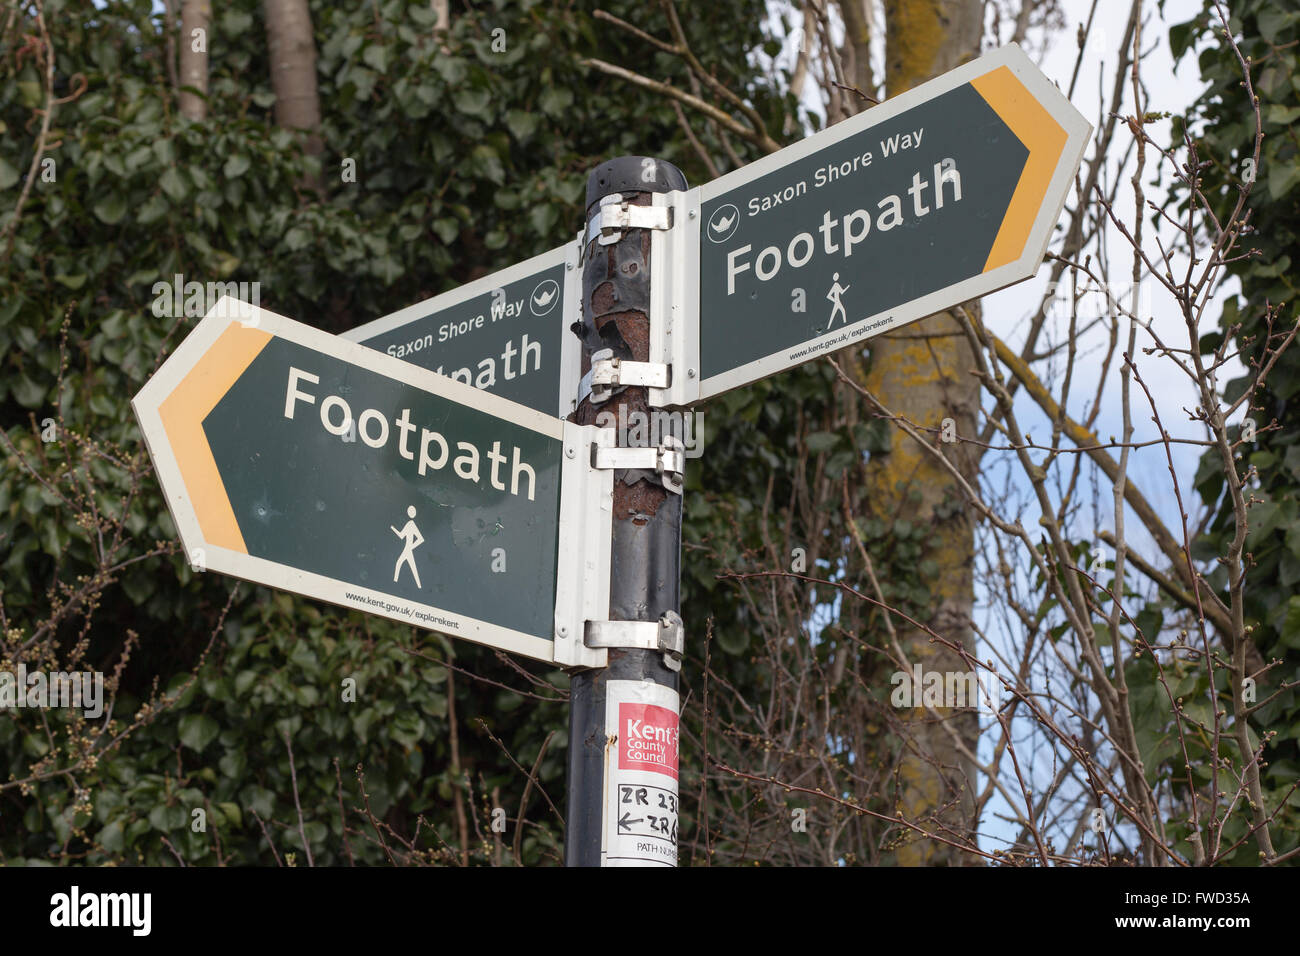 Public Footpath signs. Stock Photo